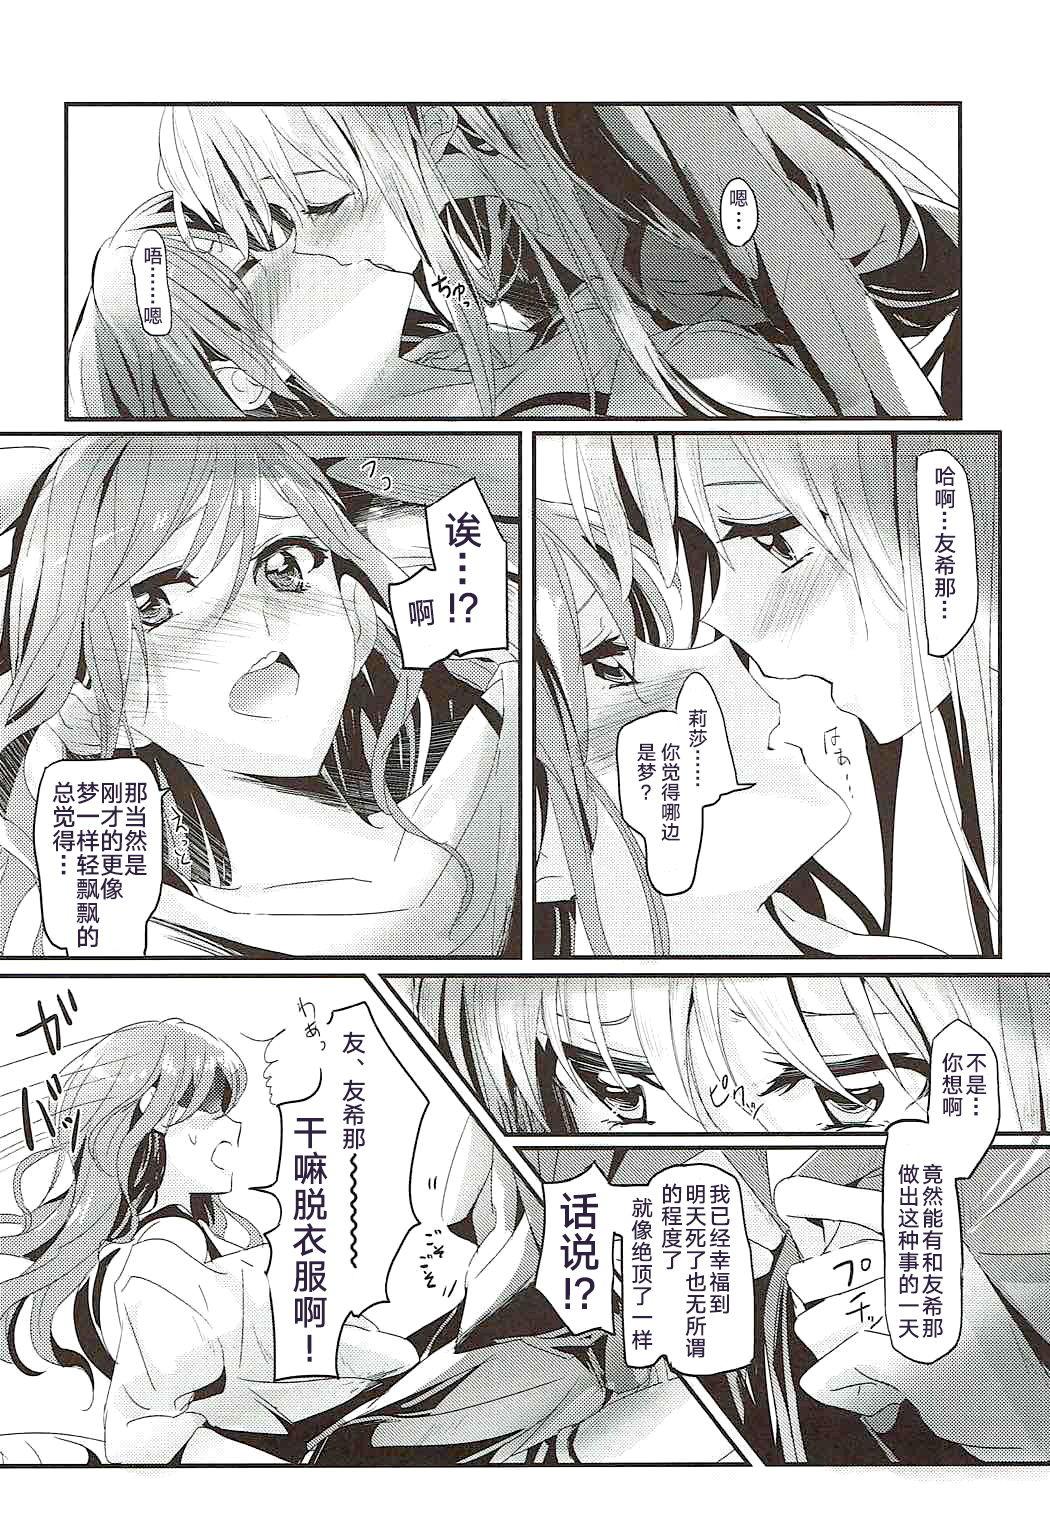 Girlfriends Unstable feelings - Bang dream Pussy Licking - Page 11